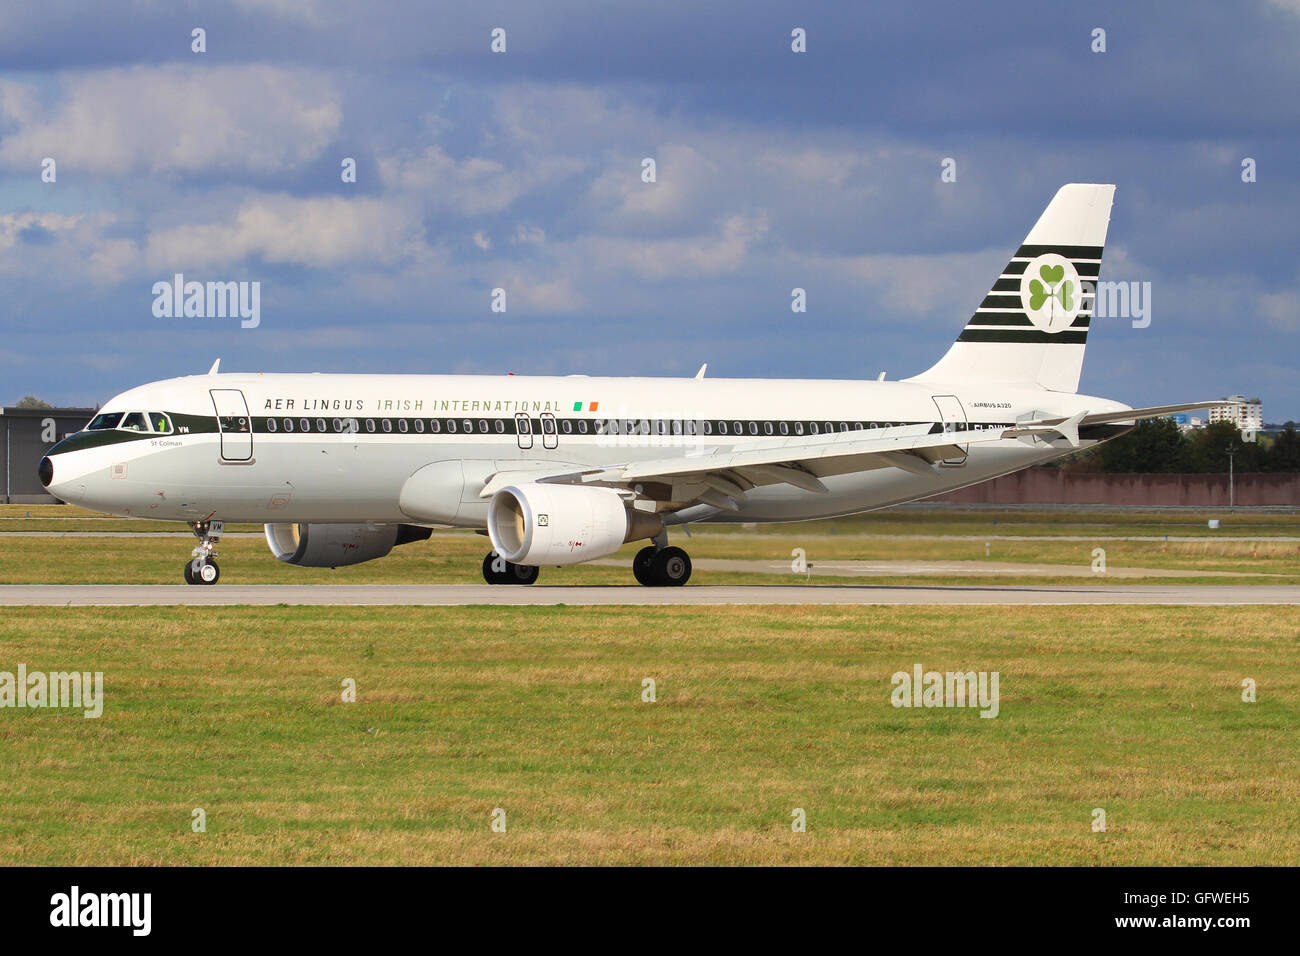 Stuttgart/Germany July 18, 2015:Airbus 320 from Aer Lingus with the Retro at Stuttgart Airport. Stock Photo